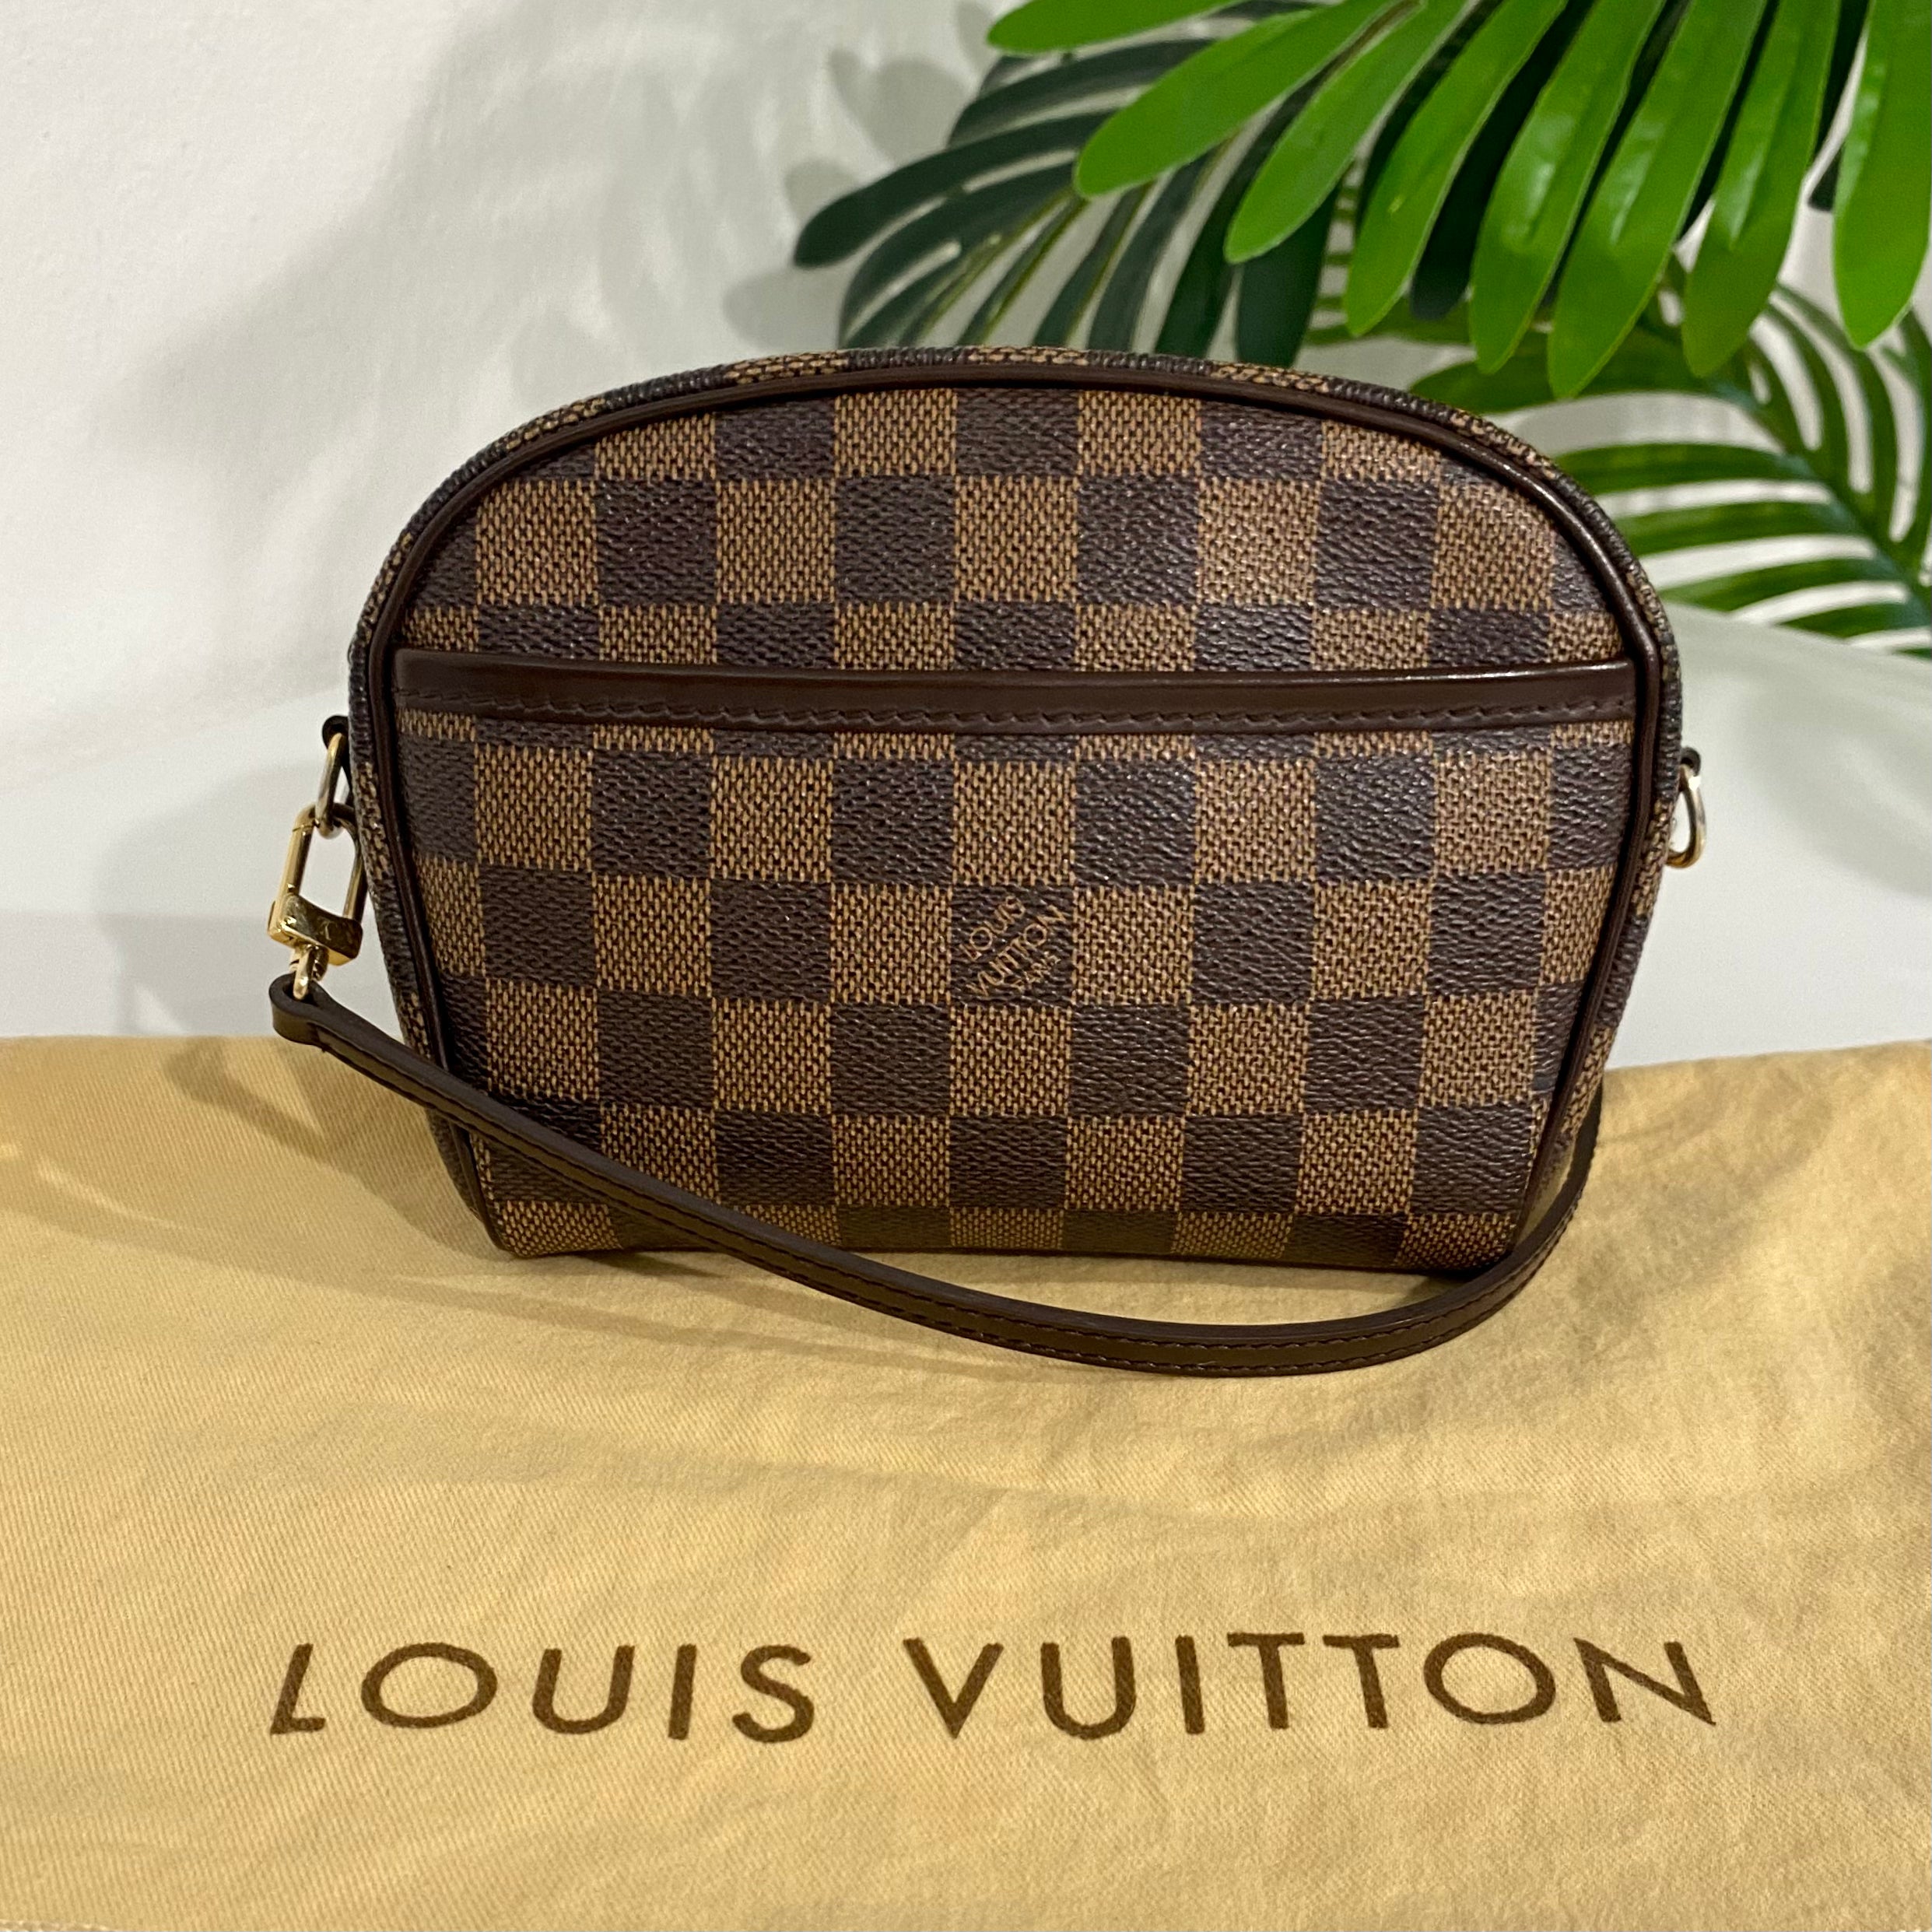 Shop for Louis Vuitton Damier Ebene Canvas Leather Ipanema PM Bag - Shipped  from USA